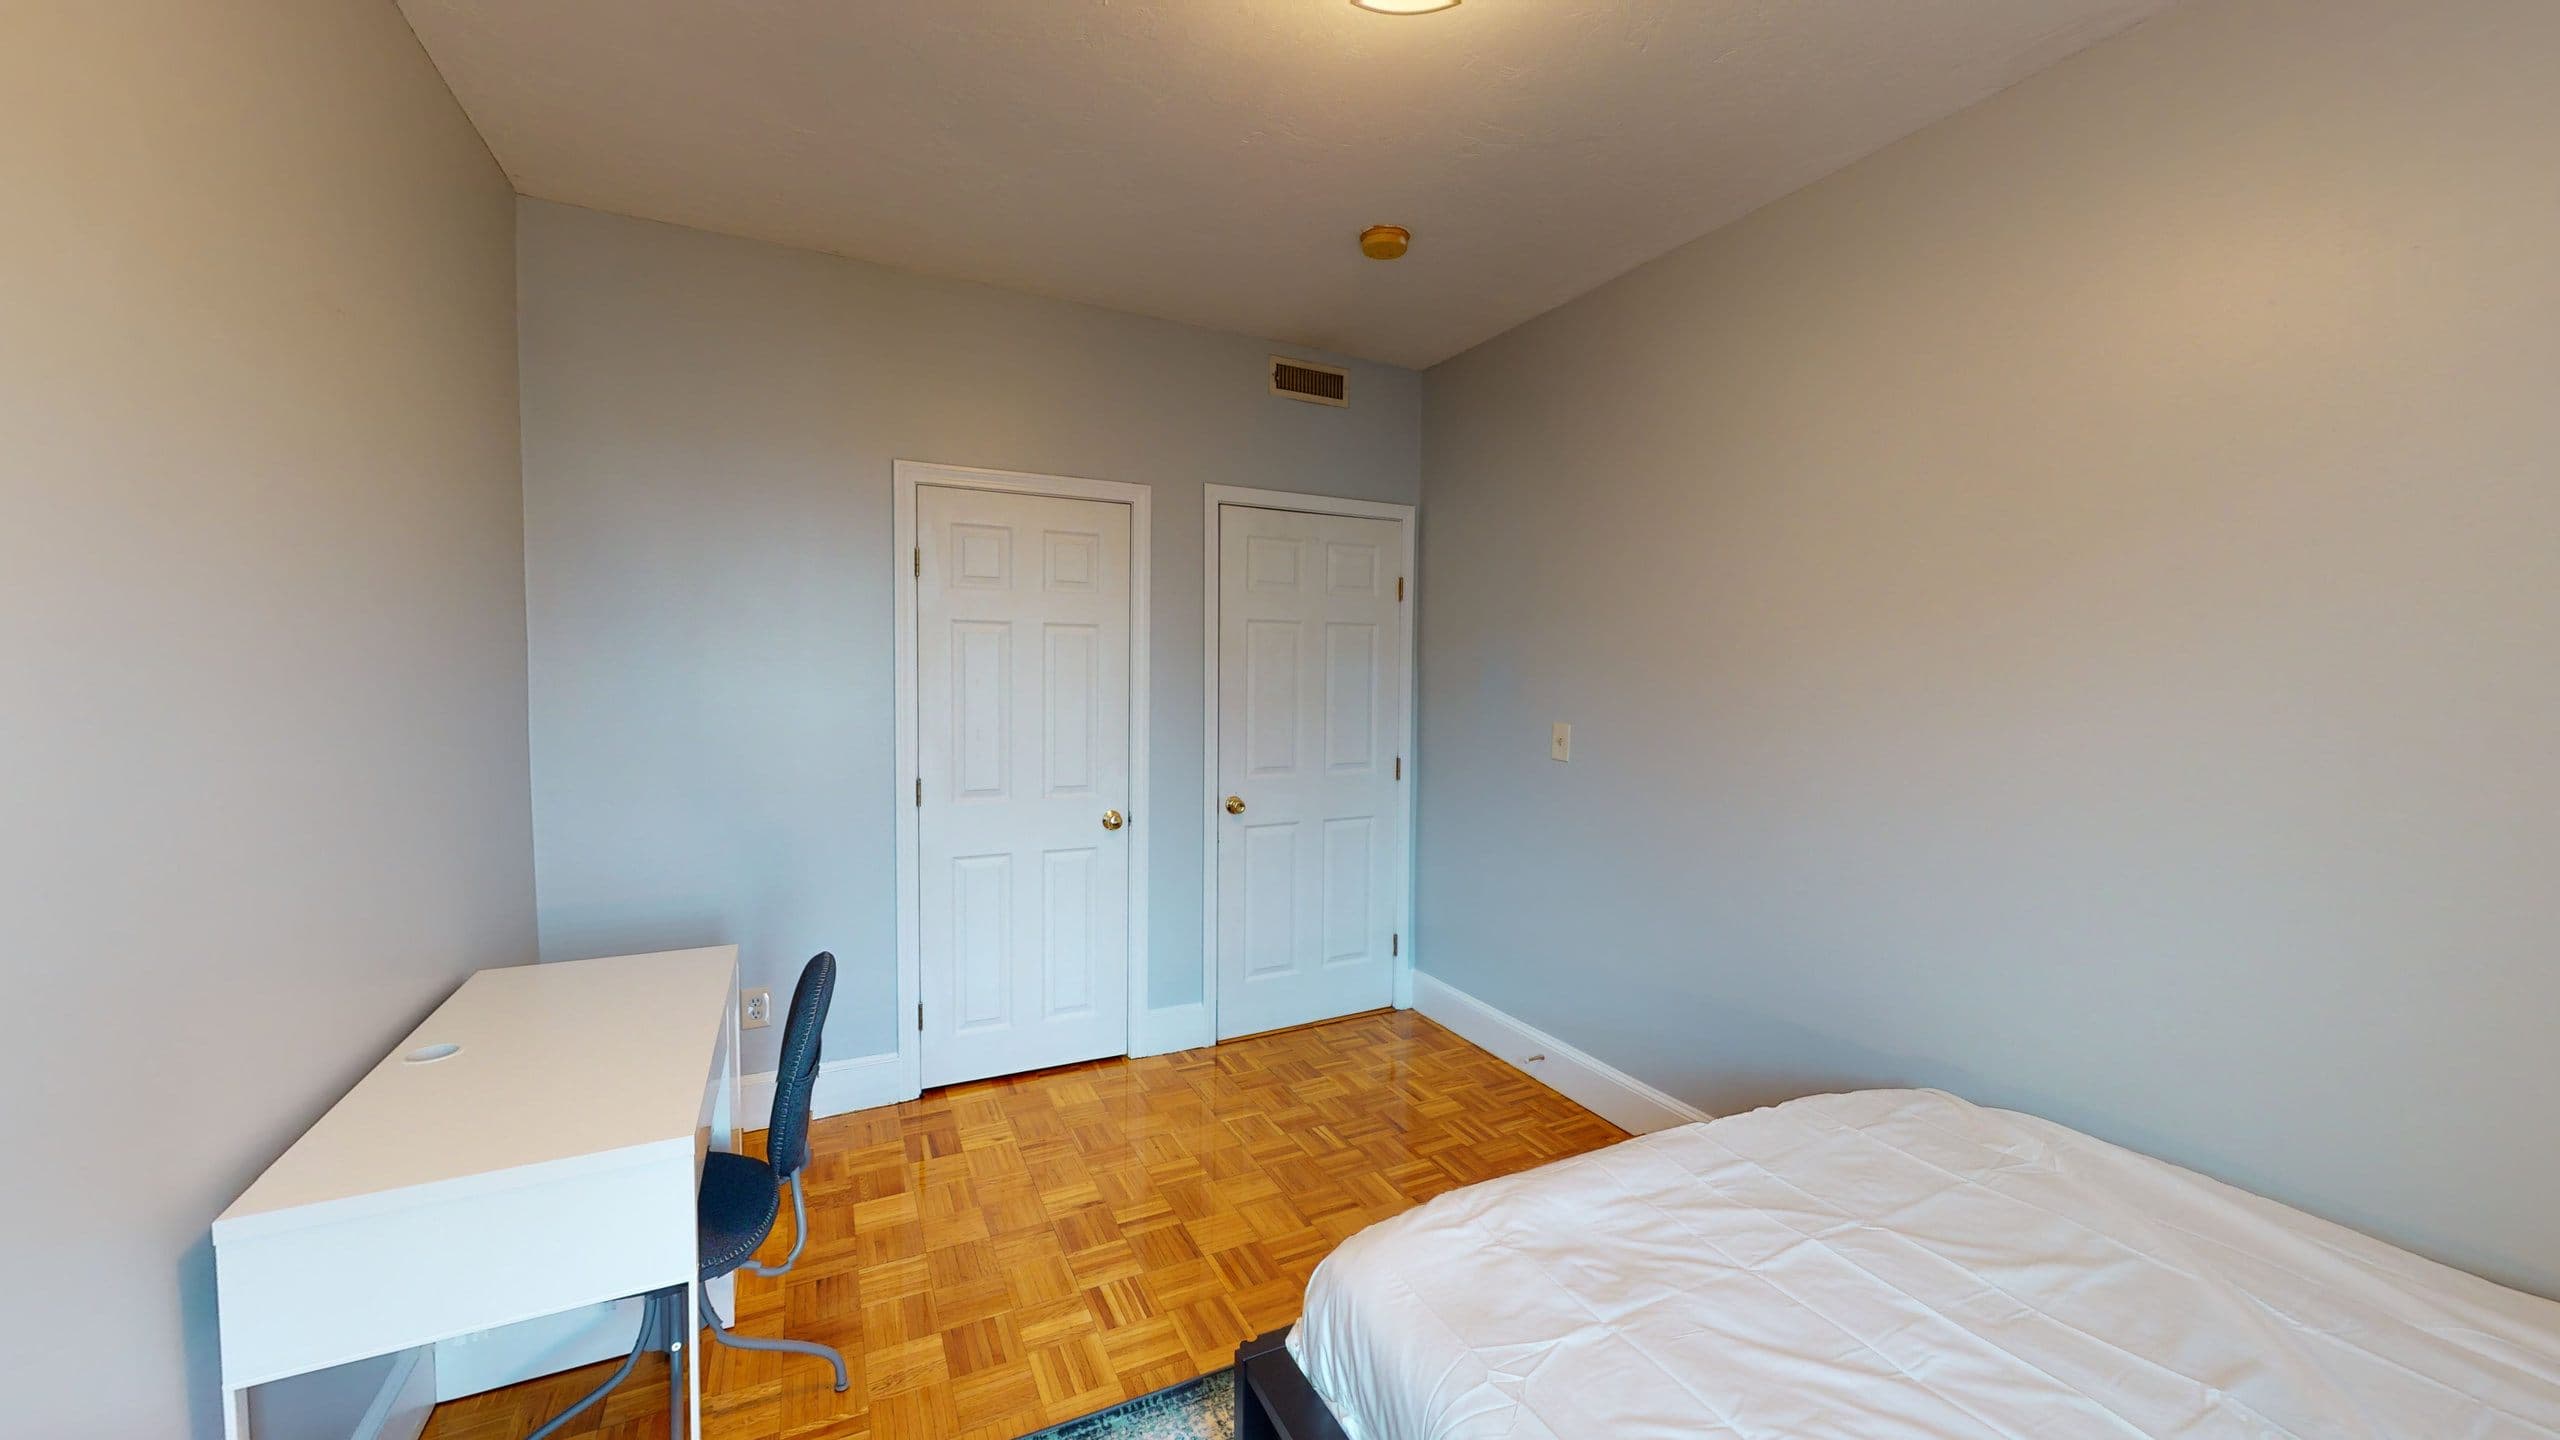 Photo 18 of #1465: Queen Bedroom A at June Homes